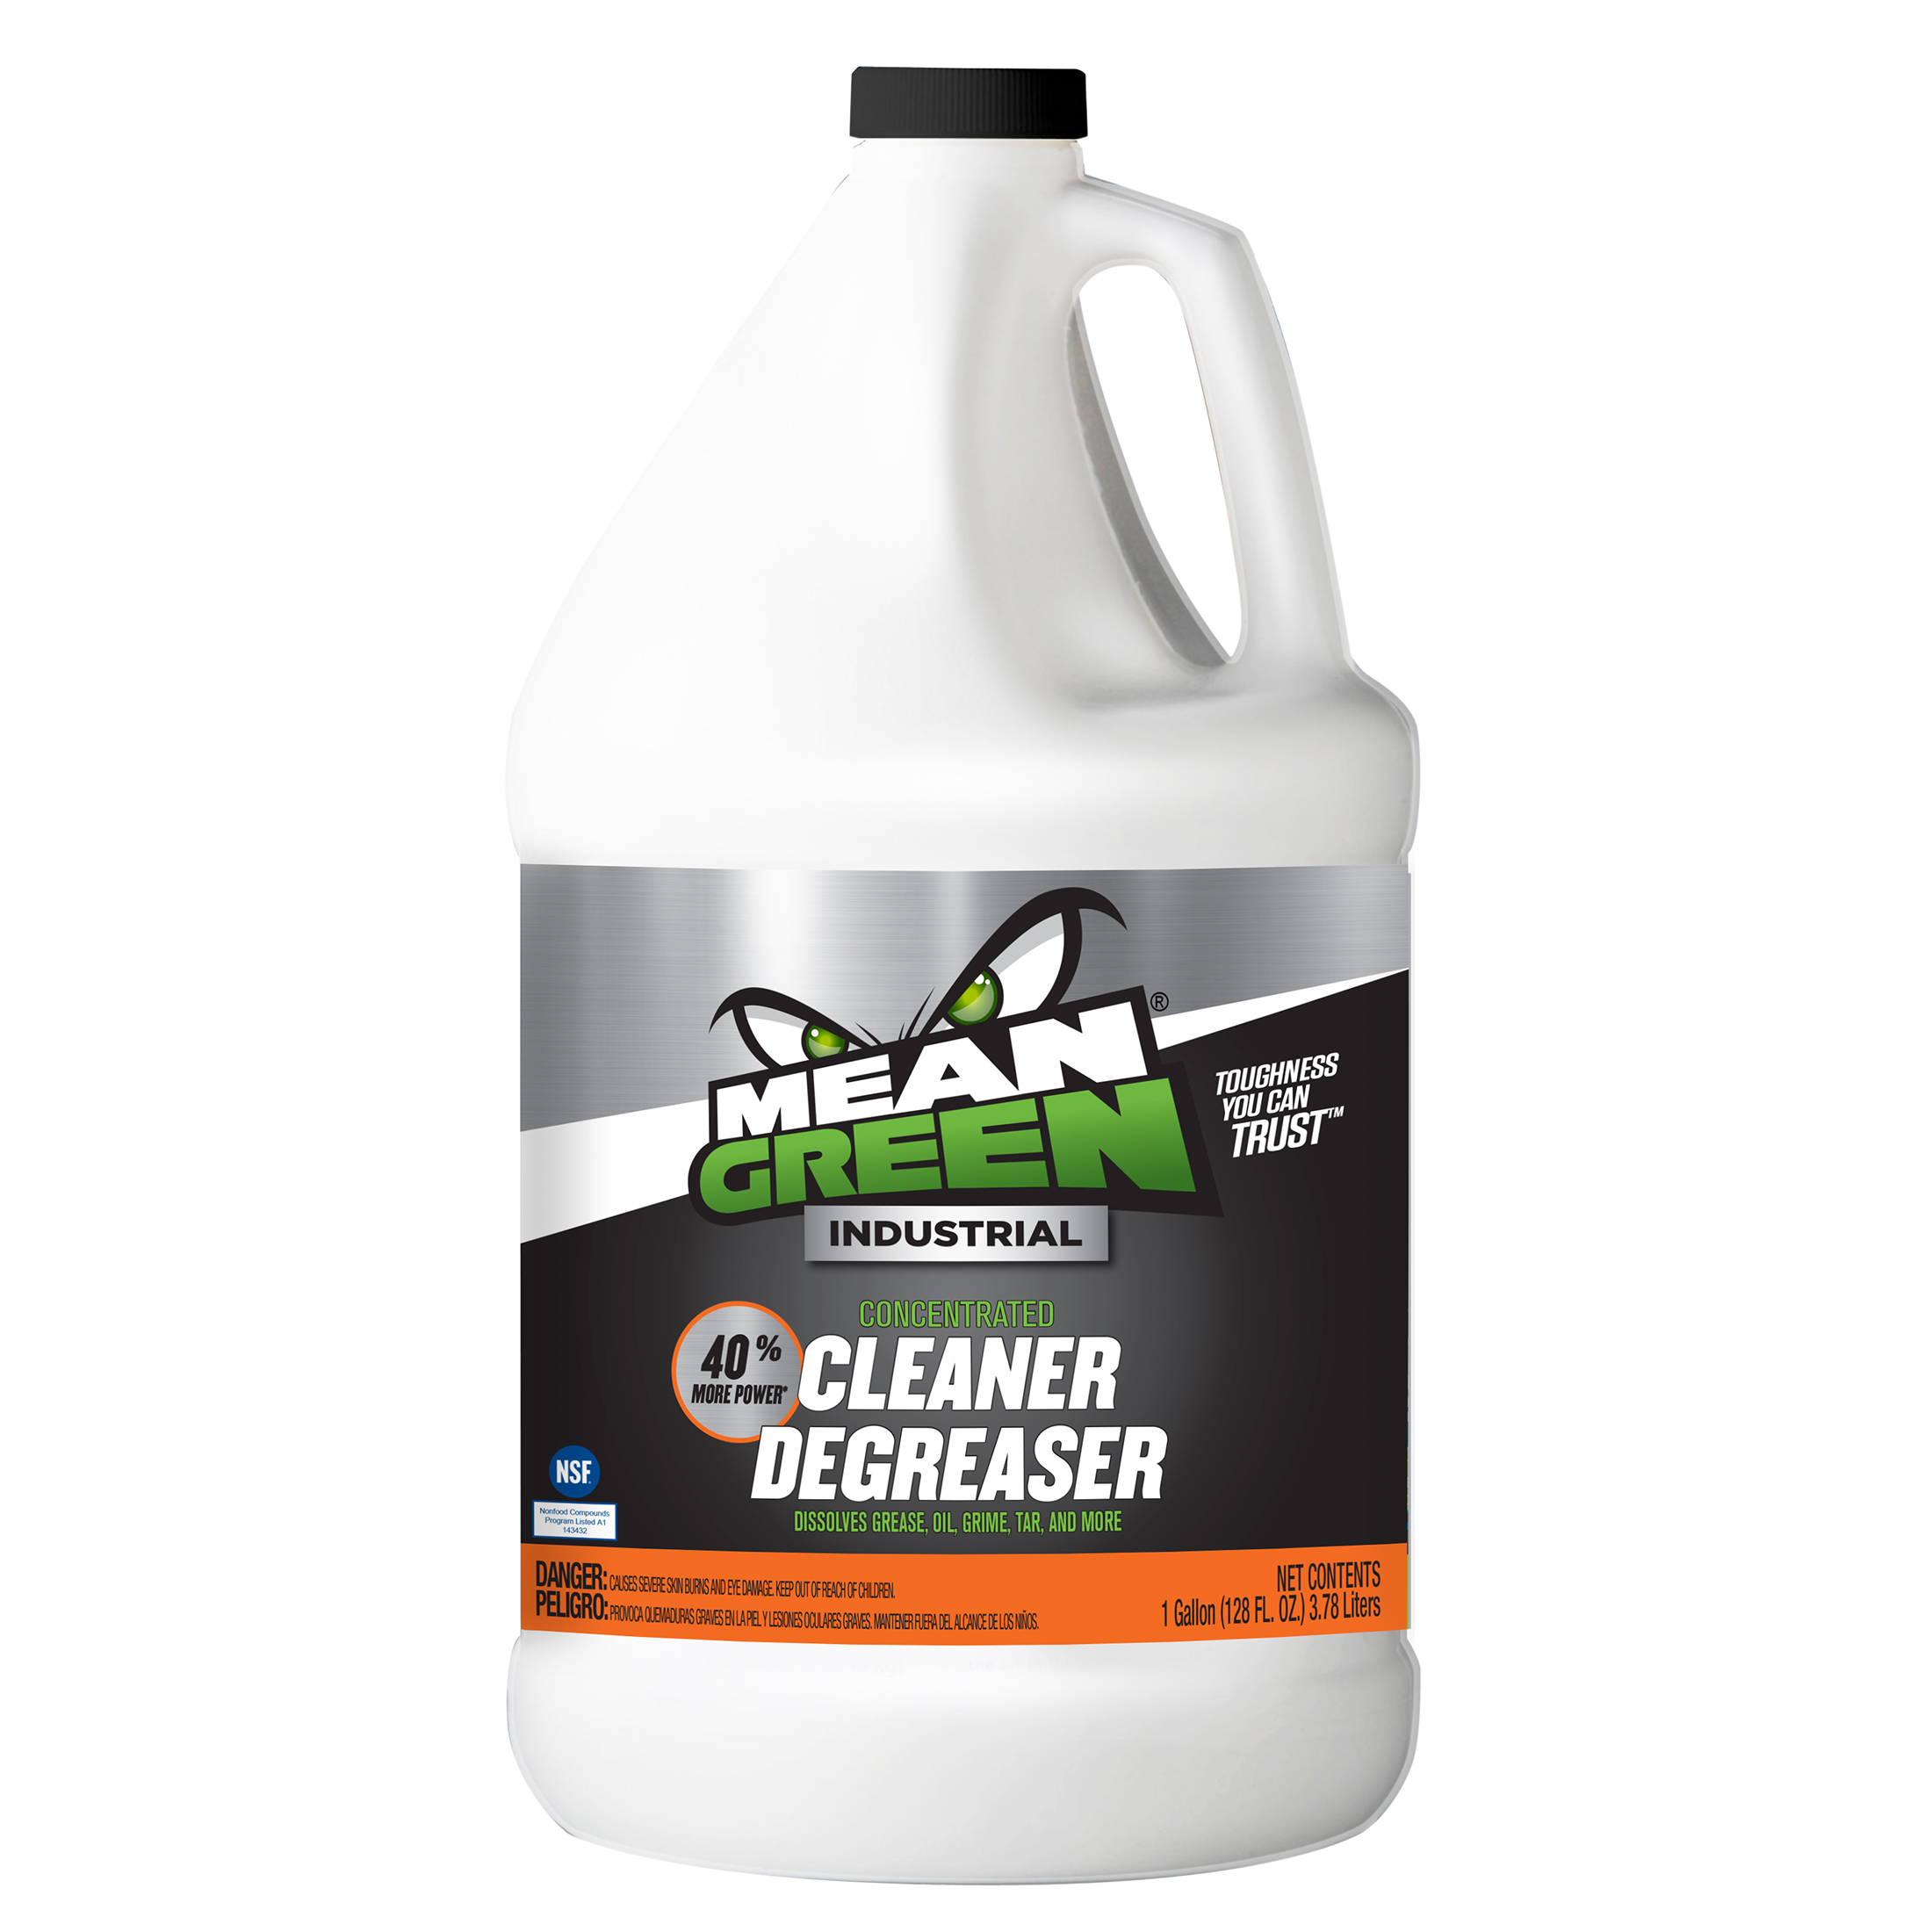 Mean Green Industrial Strength All-Purpose Cleaners-386663, Gallon - image 1 of 6